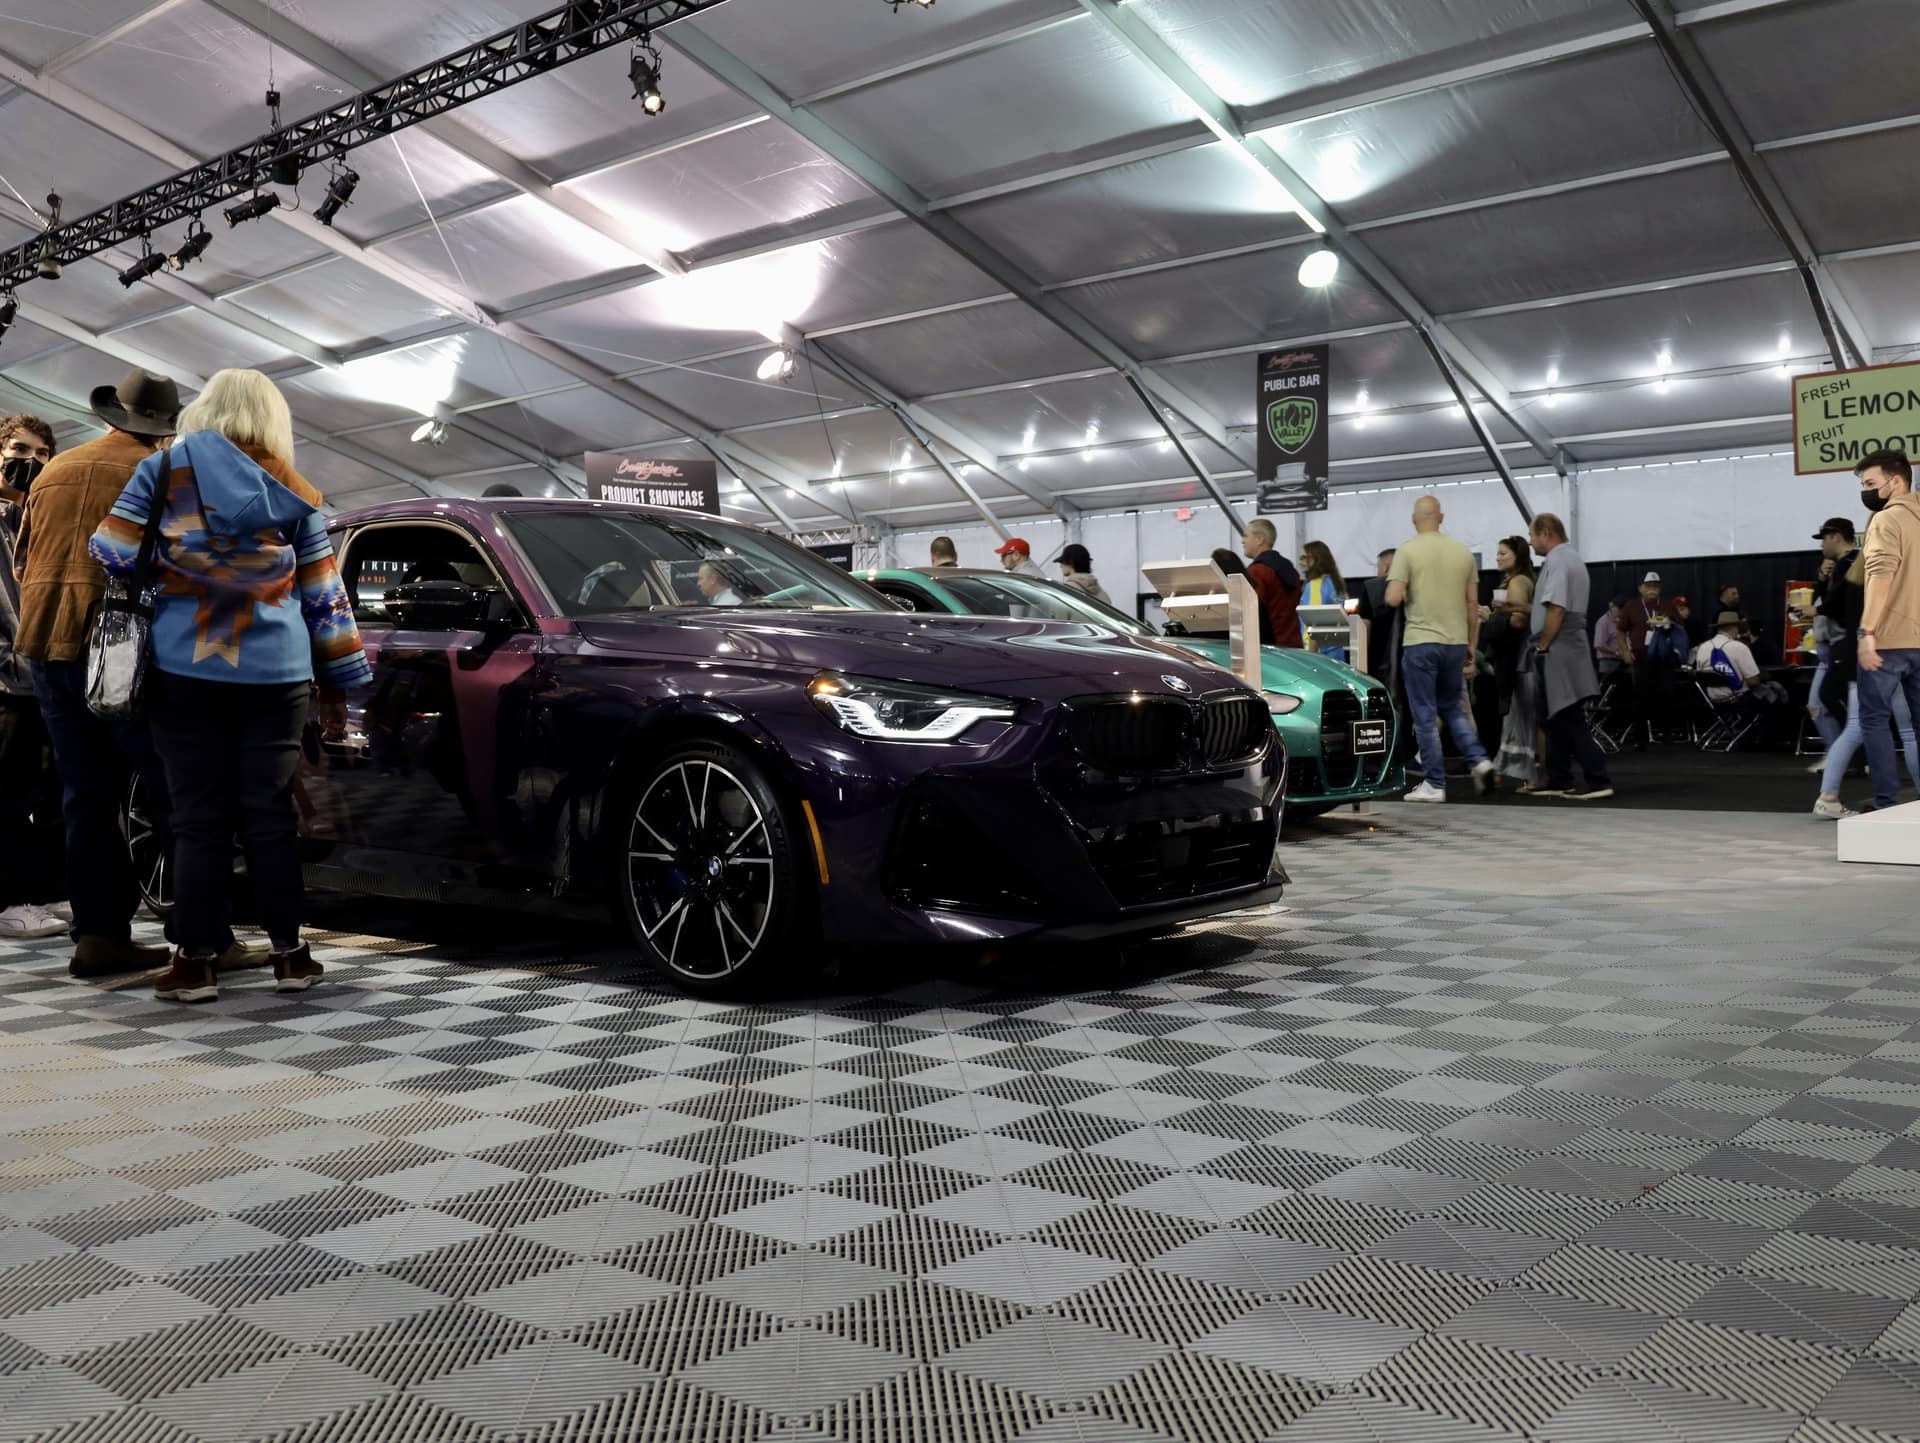 BMW cars displayed at Barrett-Jackson auctions in Scottsdale